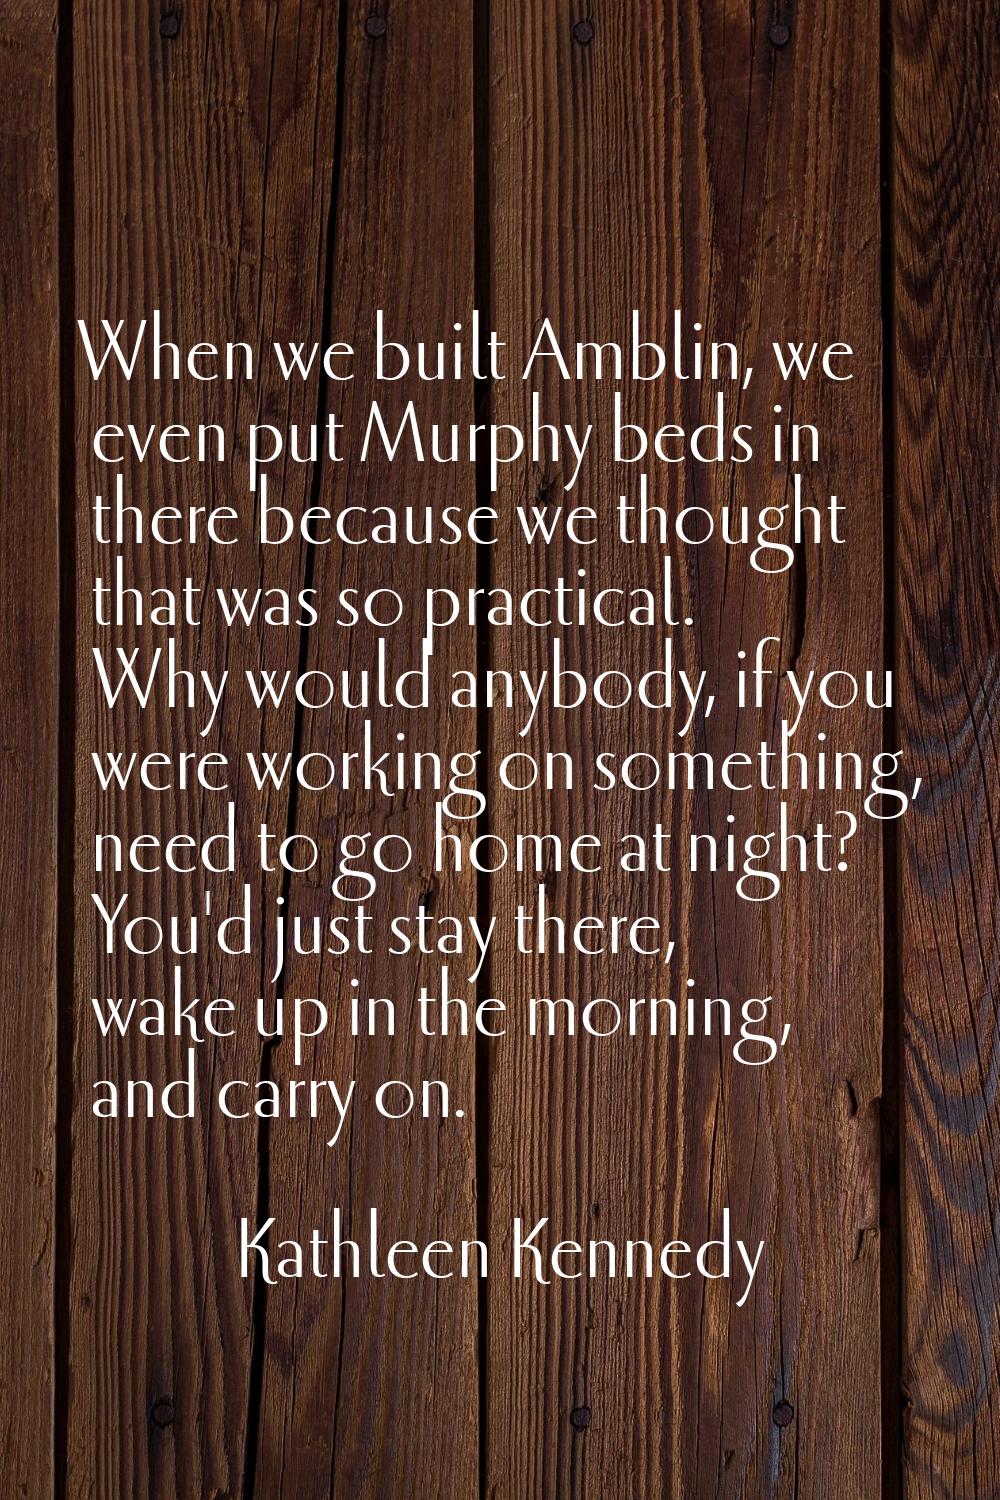 When we built Amblin, we even put Murphy beds in there because we thought that was so practical. Wh